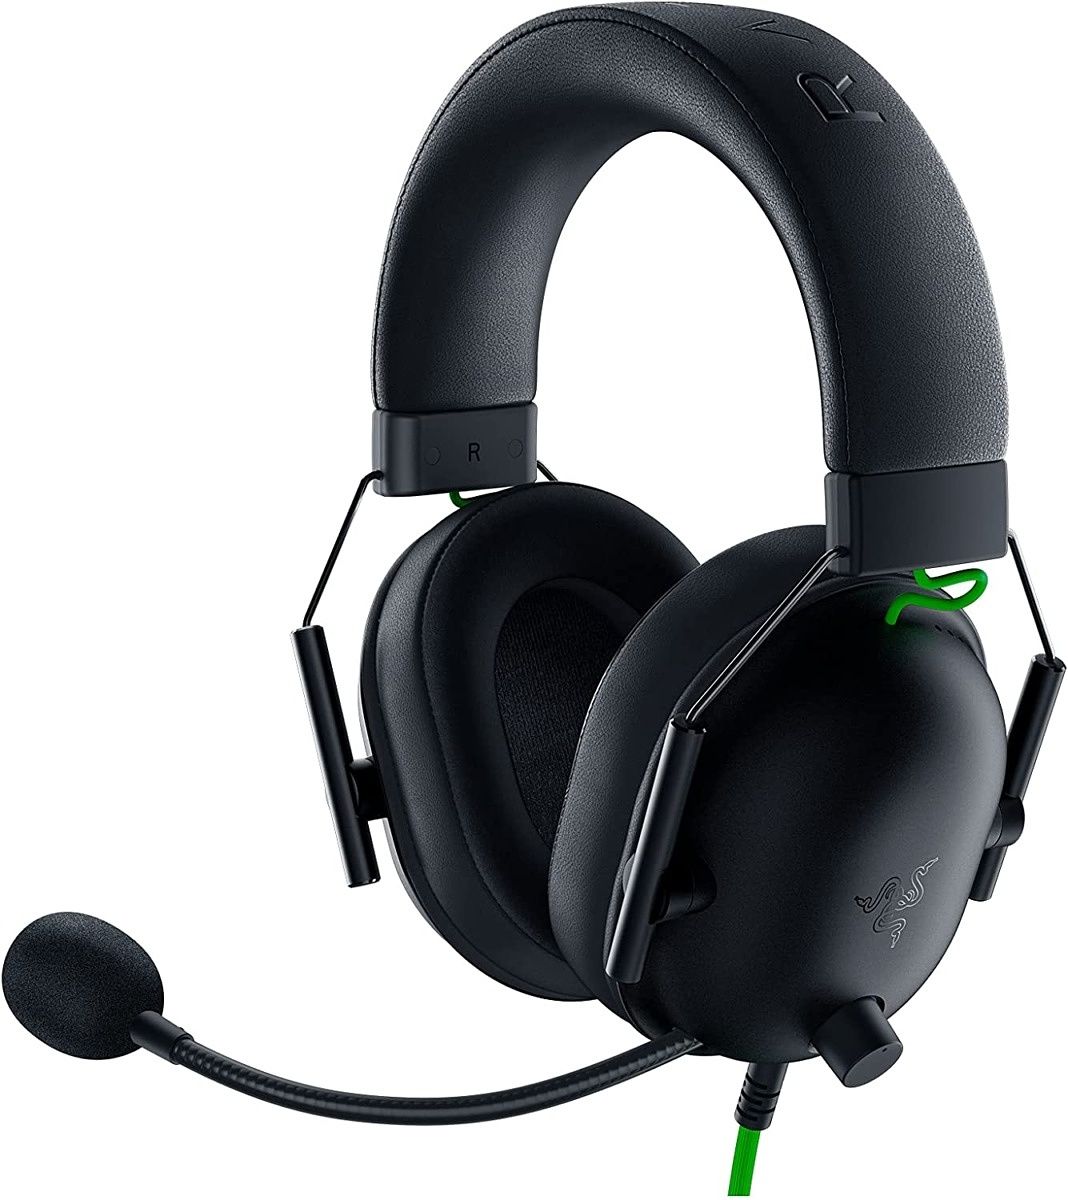 This budget gaming headset has a 3.5mm connection and software-based surround sound.